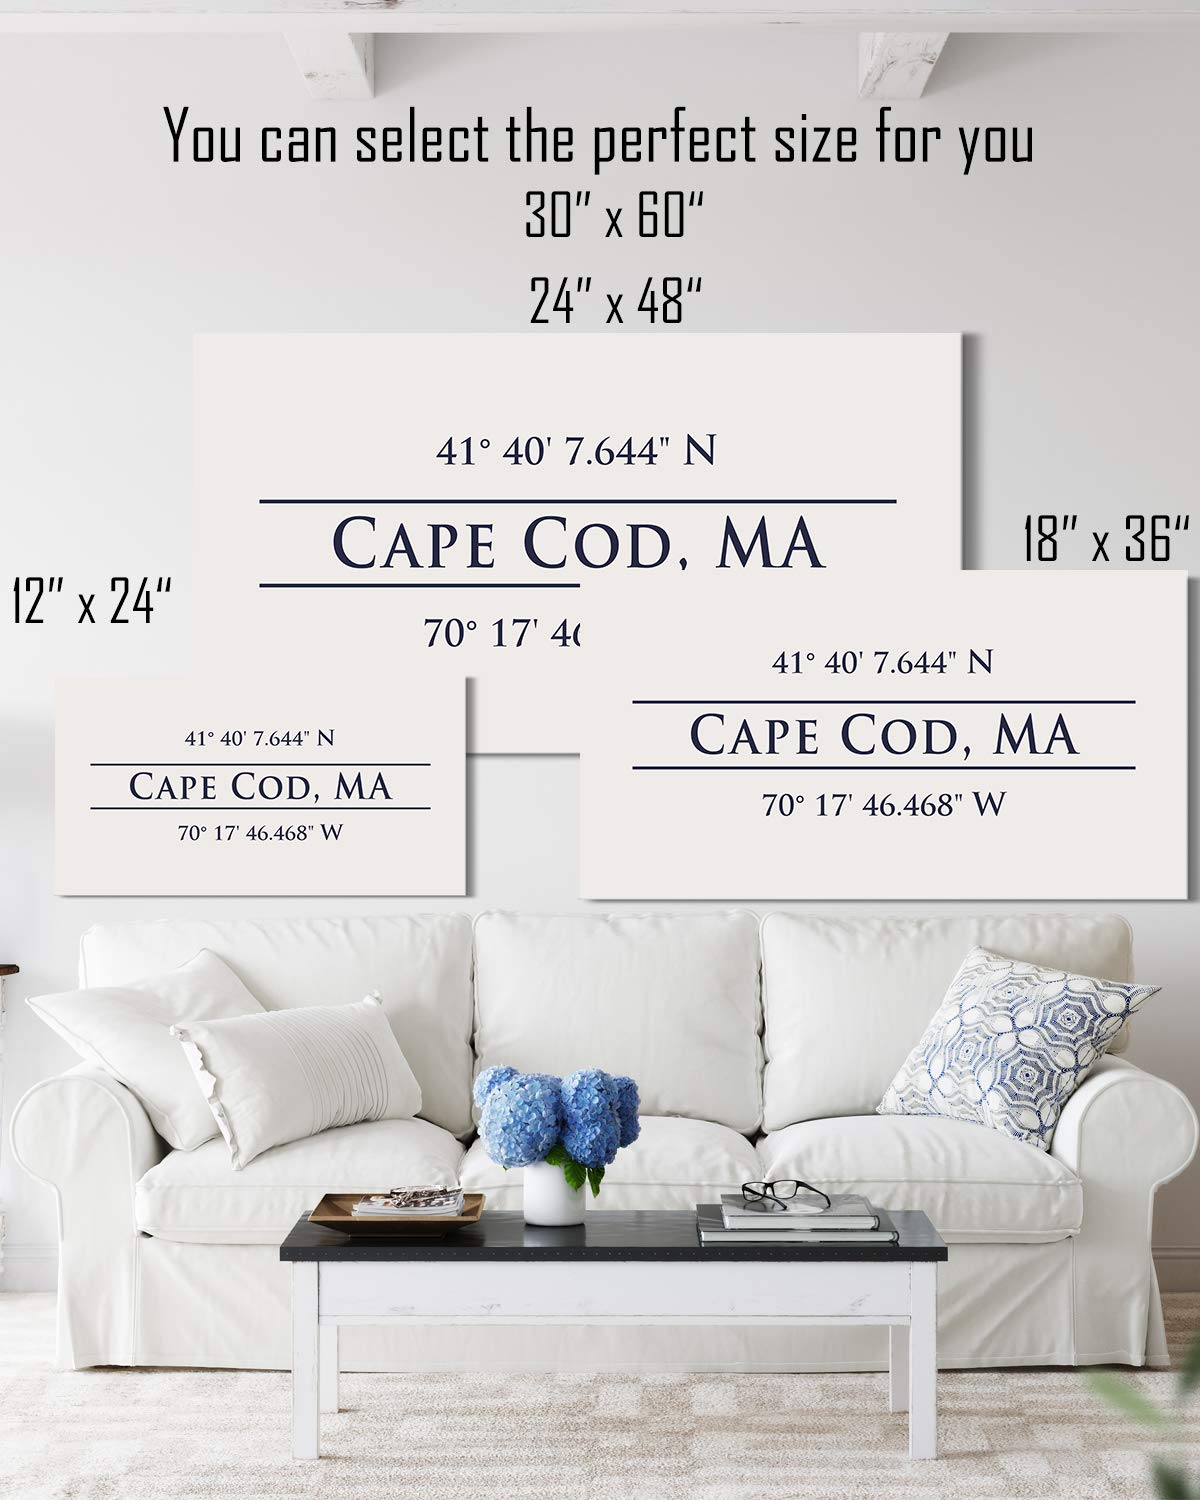 Cape Cod, MA 41° 40' 7.644" N, 70° 17' 46.468" W - Wall Decor Art Canvas with an offwhite background - Ready to Hang - Great for above a couch, table, bed or more